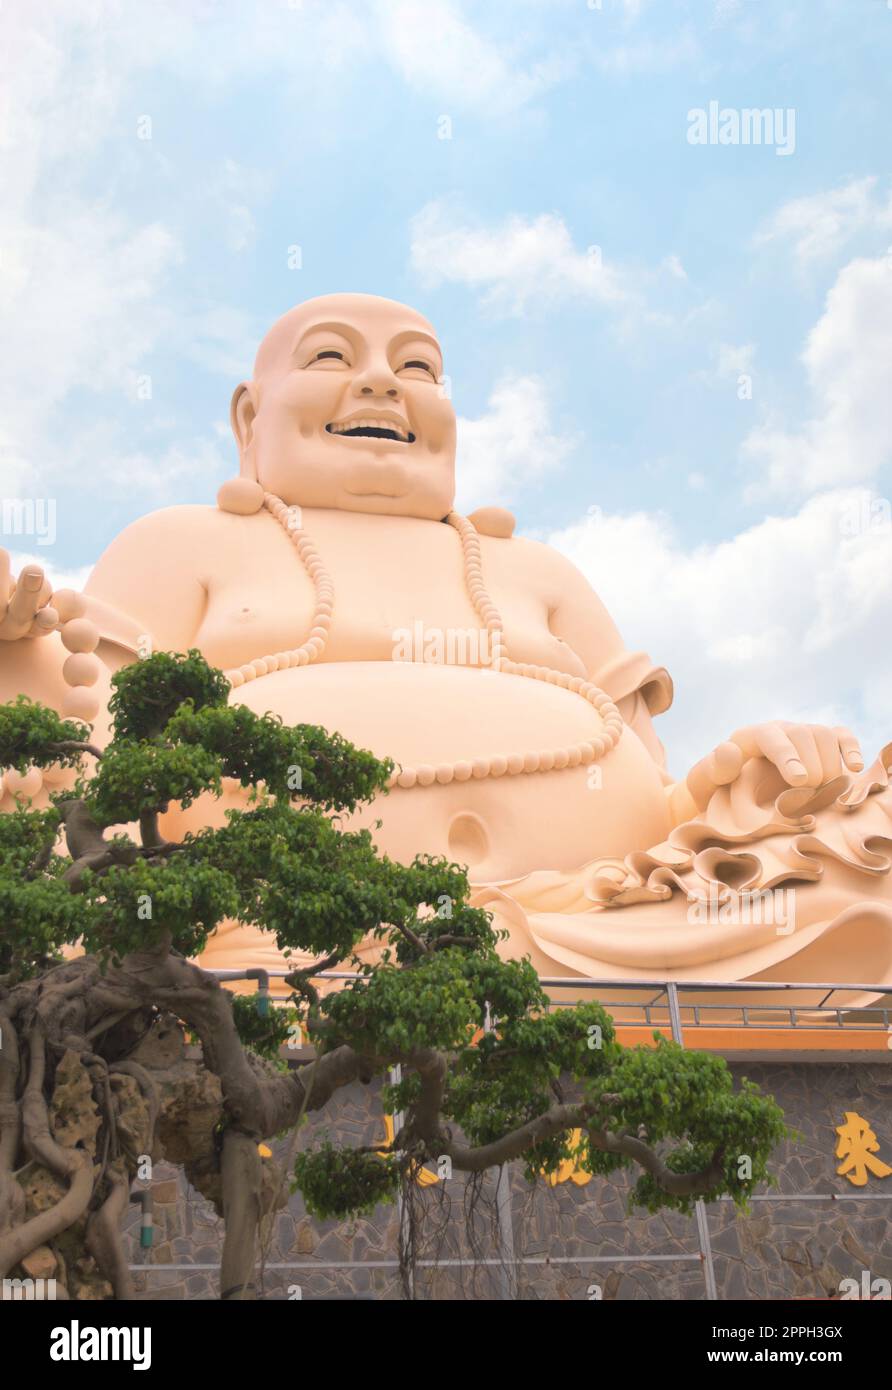 Laughing buddha statue at Vinh Trang temple, near My Tho, Vietnam. Low angle view with bonsai tree on the foreground. Stock Photo